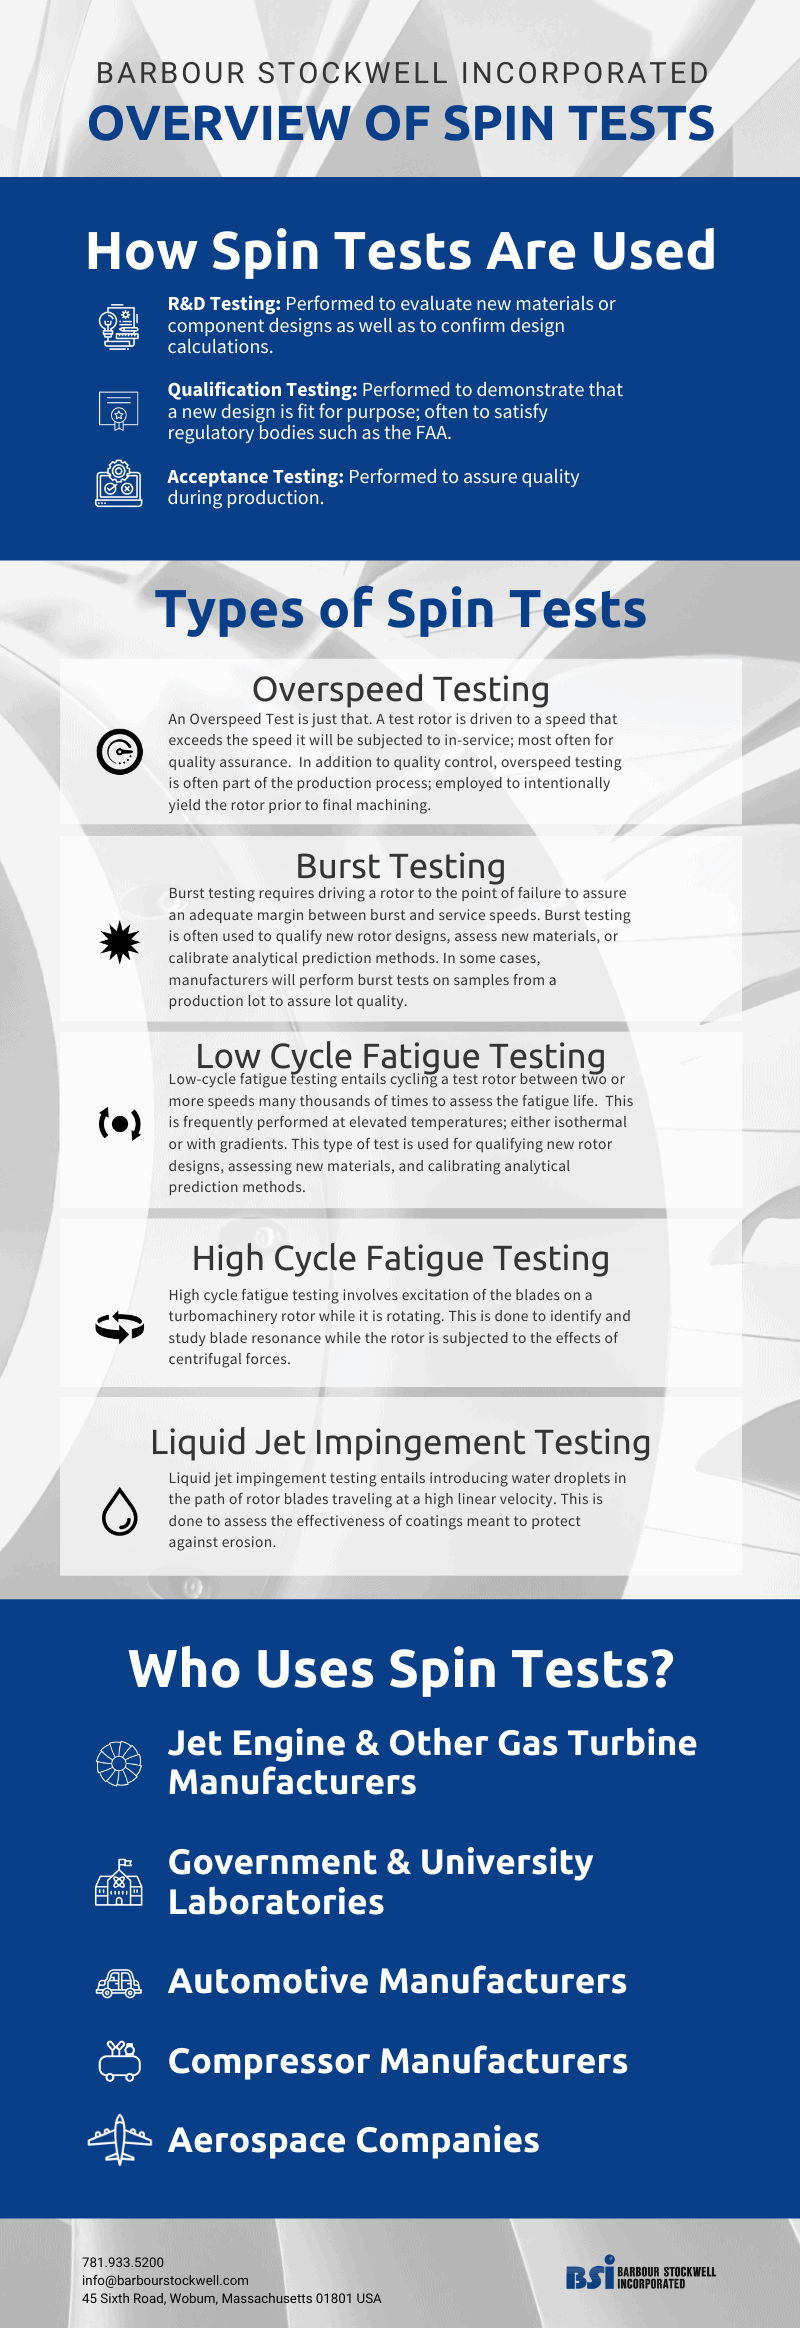 Overview of Spin Tests